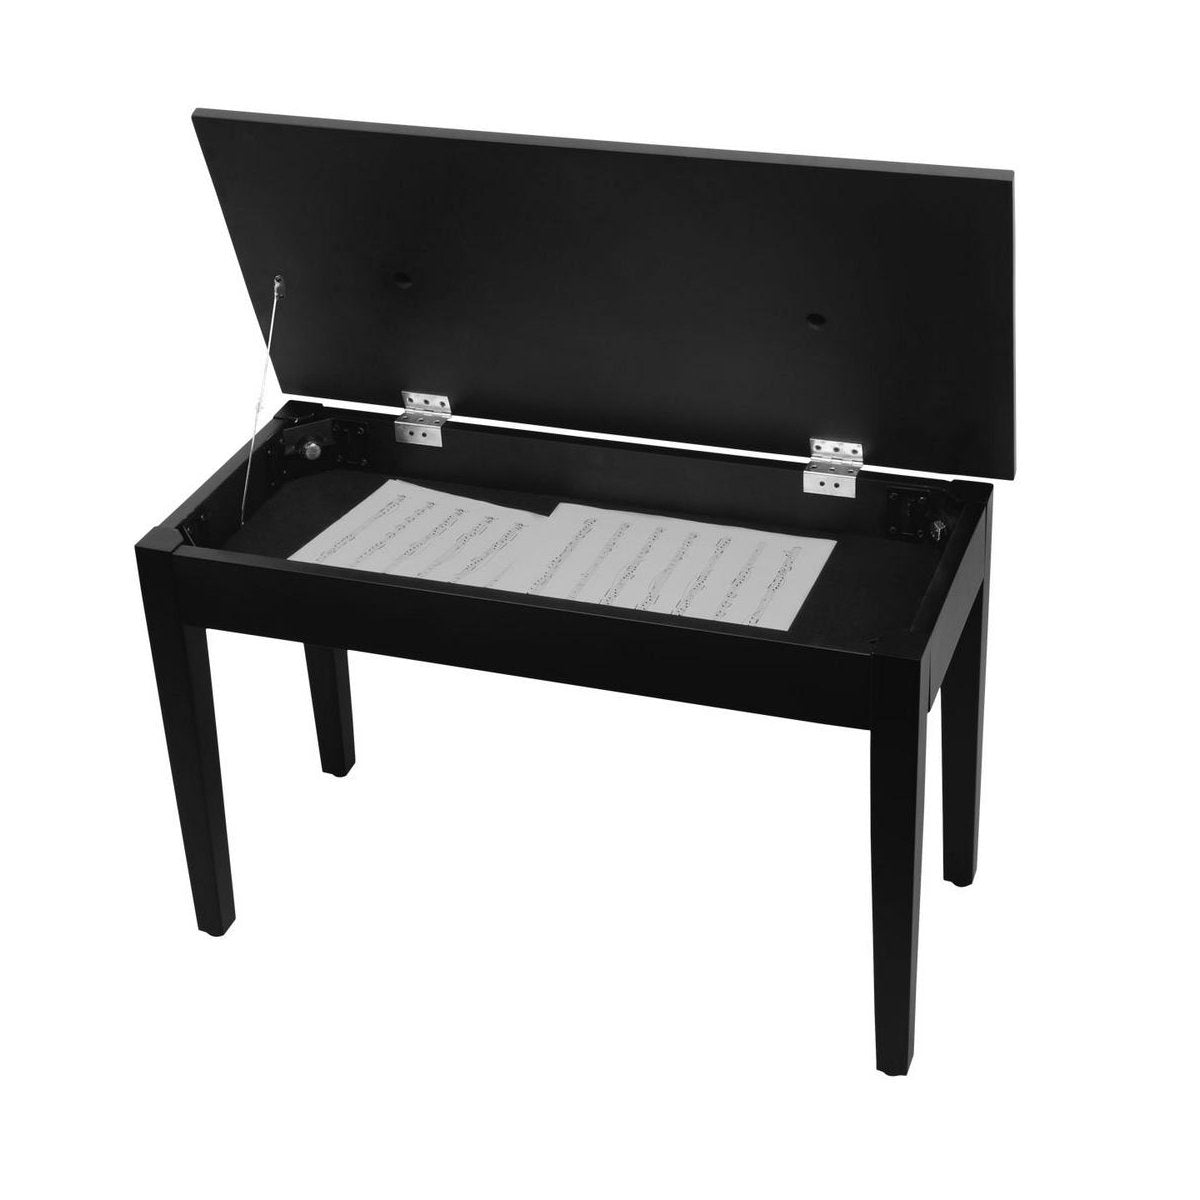 On-Stage KB8904B Deluxe Piano Bench with Storage Compartment, Black Satin